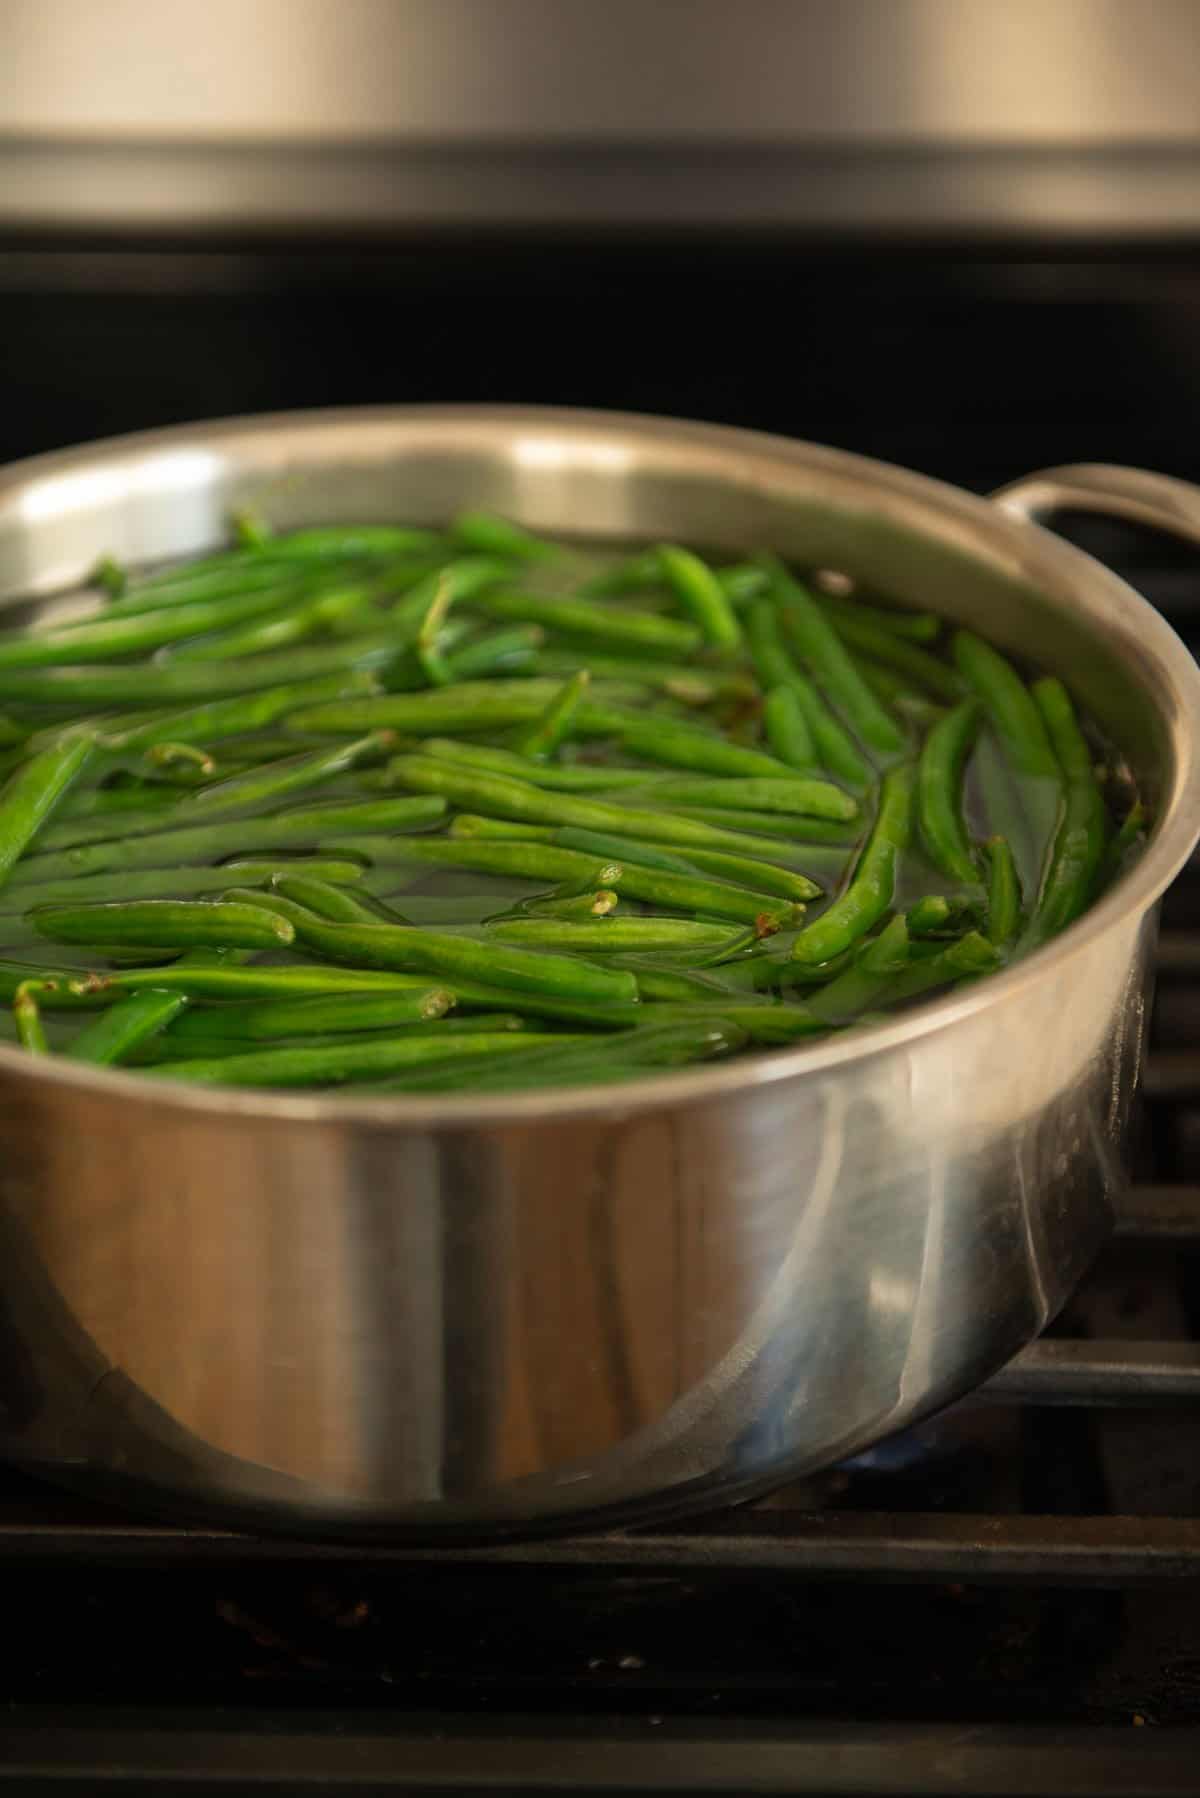 A pan filled with green beans on a stove top.